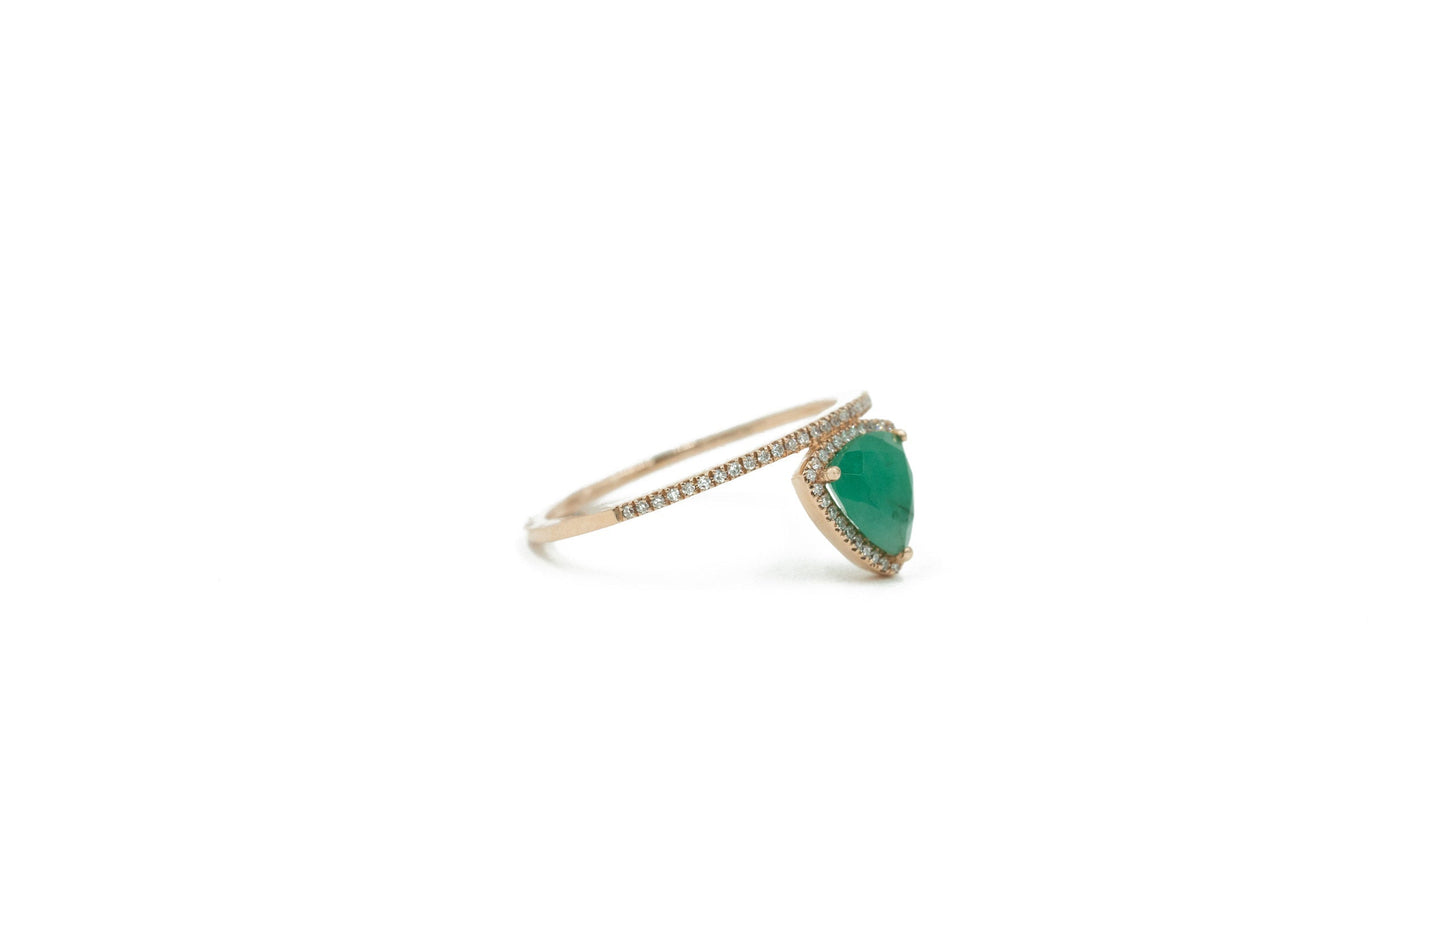 14KT Rose Gold Diamond Pave and Emerald Slice Ring